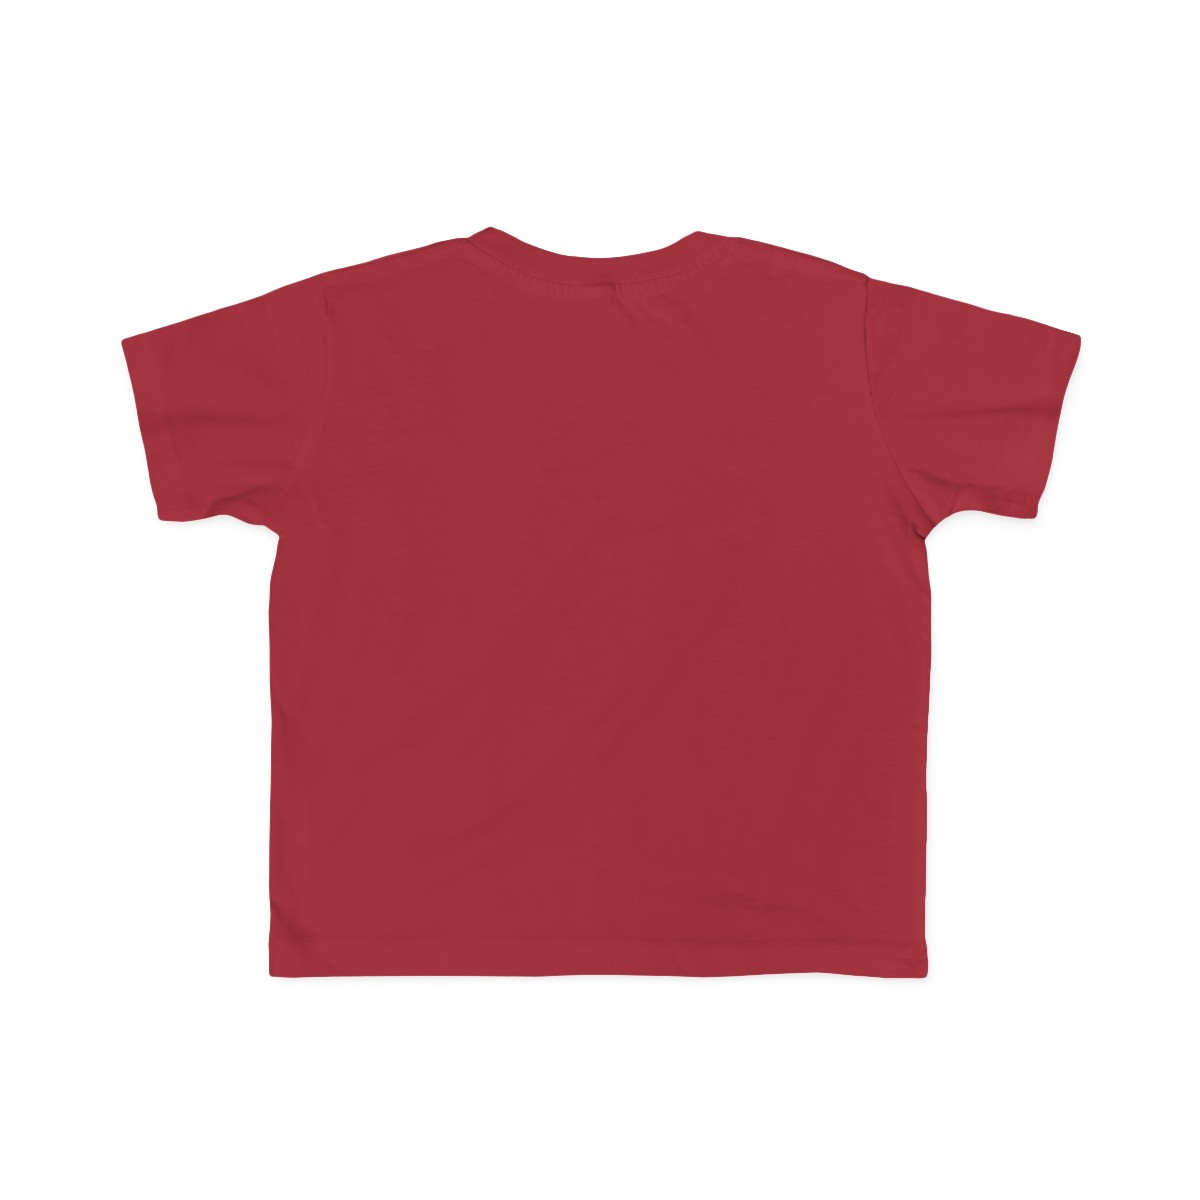 Toddler's Fine Jersey Tee with CFM logo product thumbnail image